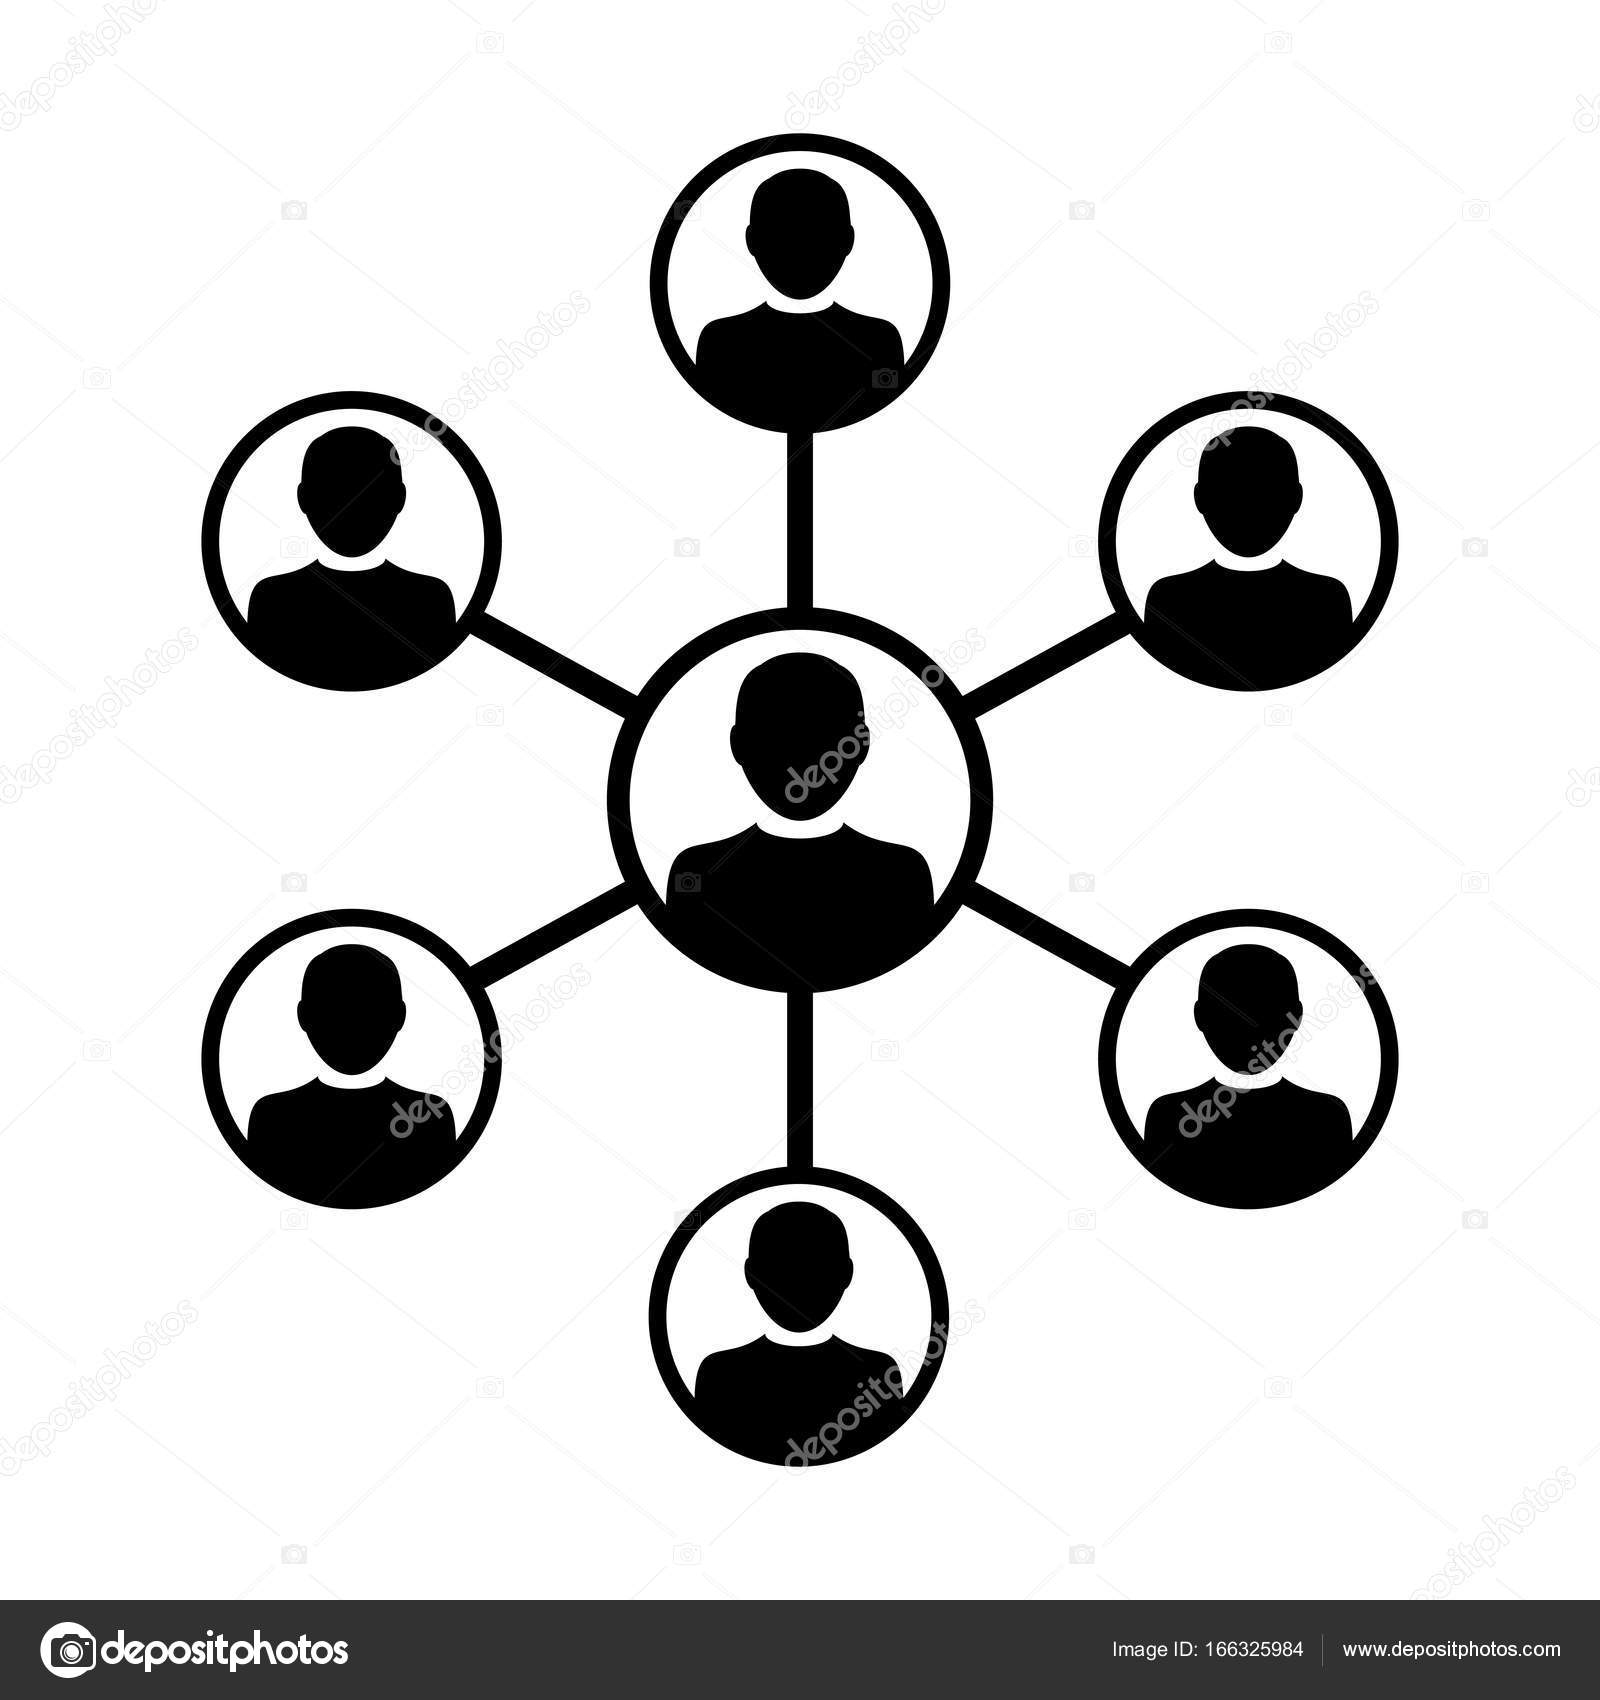 Thin lines connection people group icon outline of